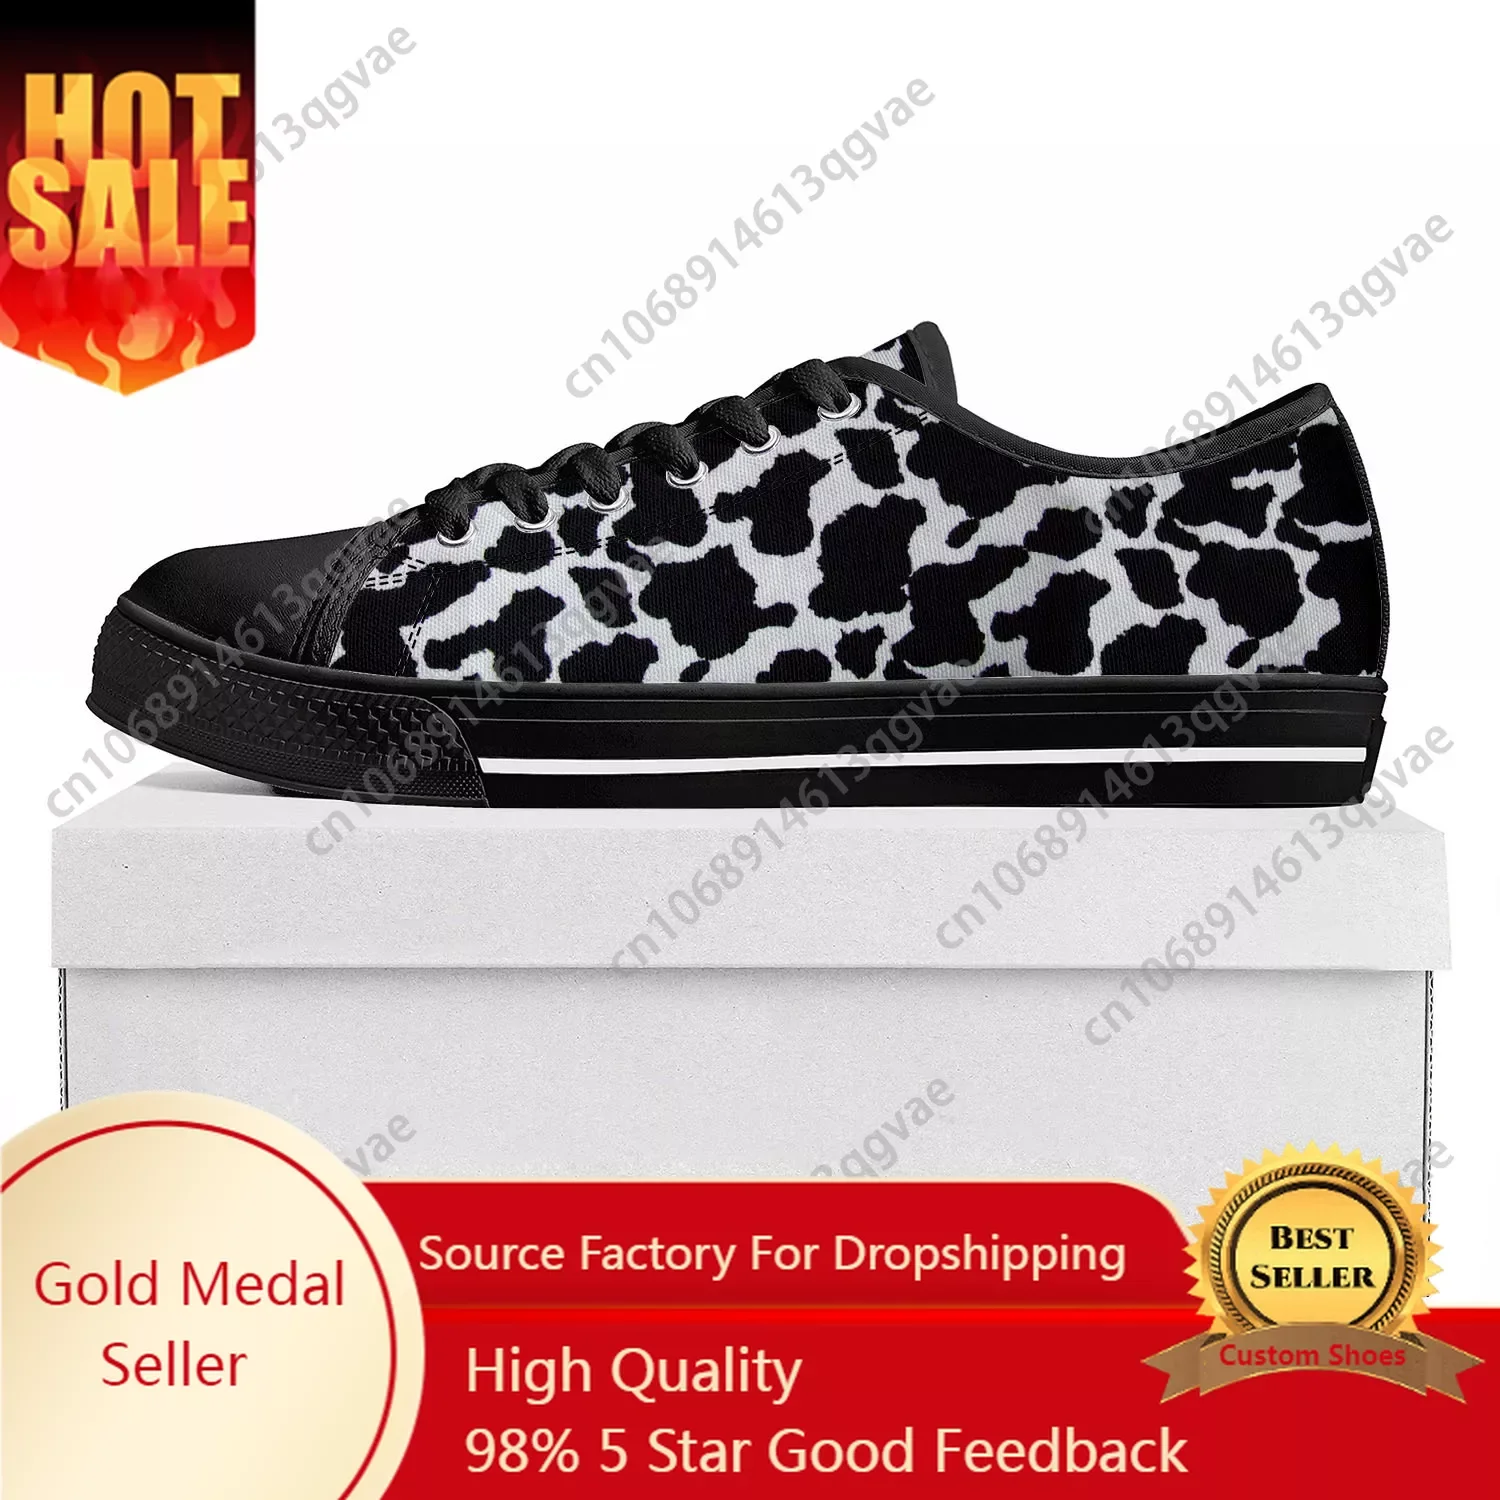 

Cow Print 3D Pattern Low Top High Quality Sneakers Mens Womens Teenager Canvas Sneaker Black White Printed Couple Custom Shoe